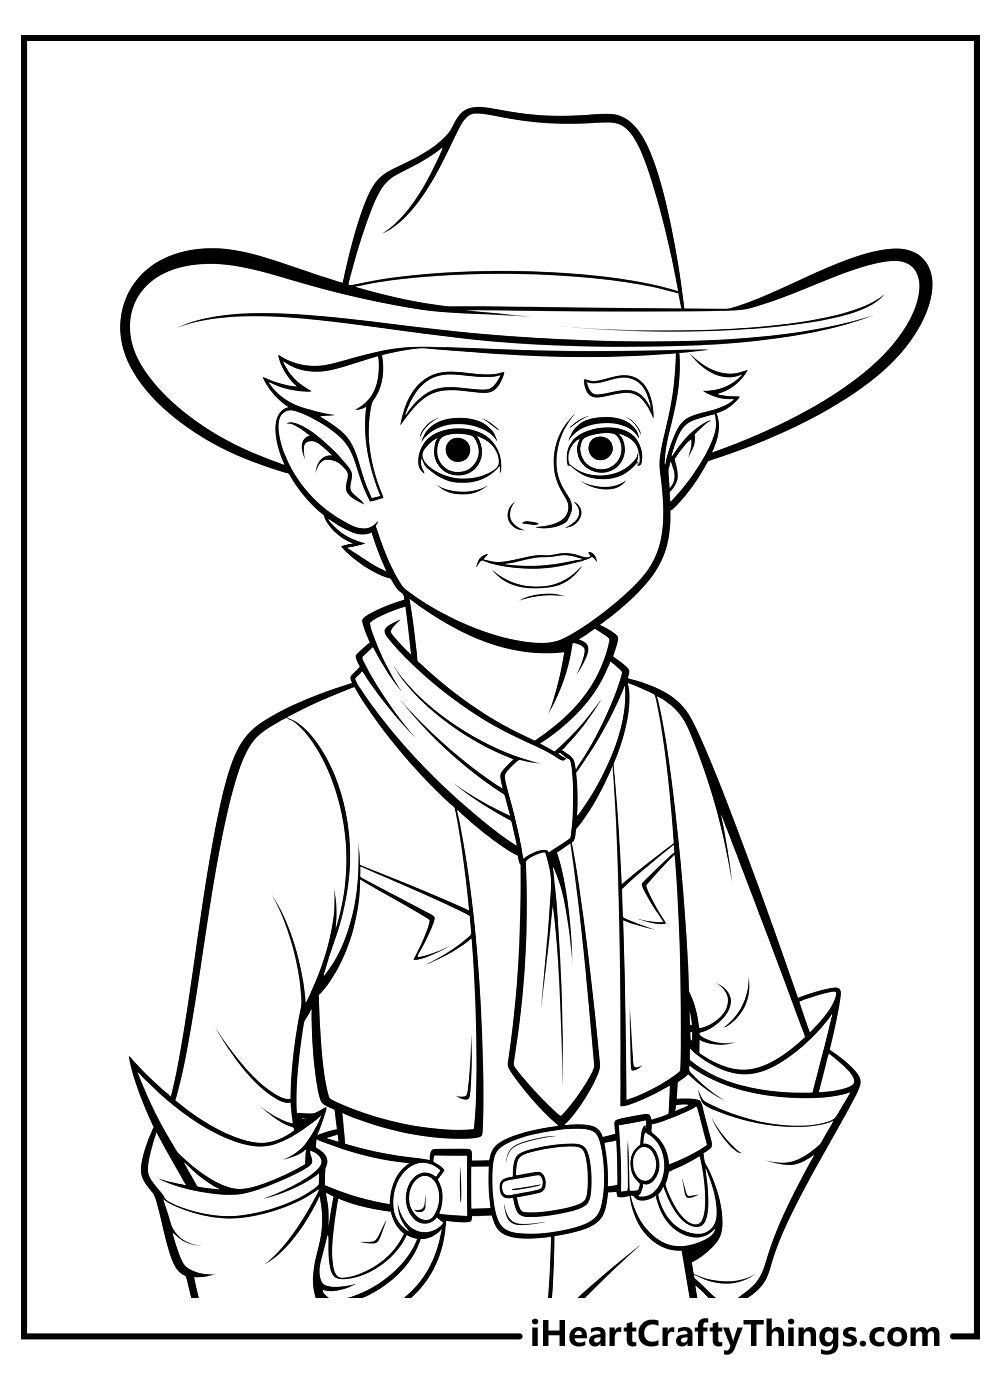 black-and-white cowboy coloring pages